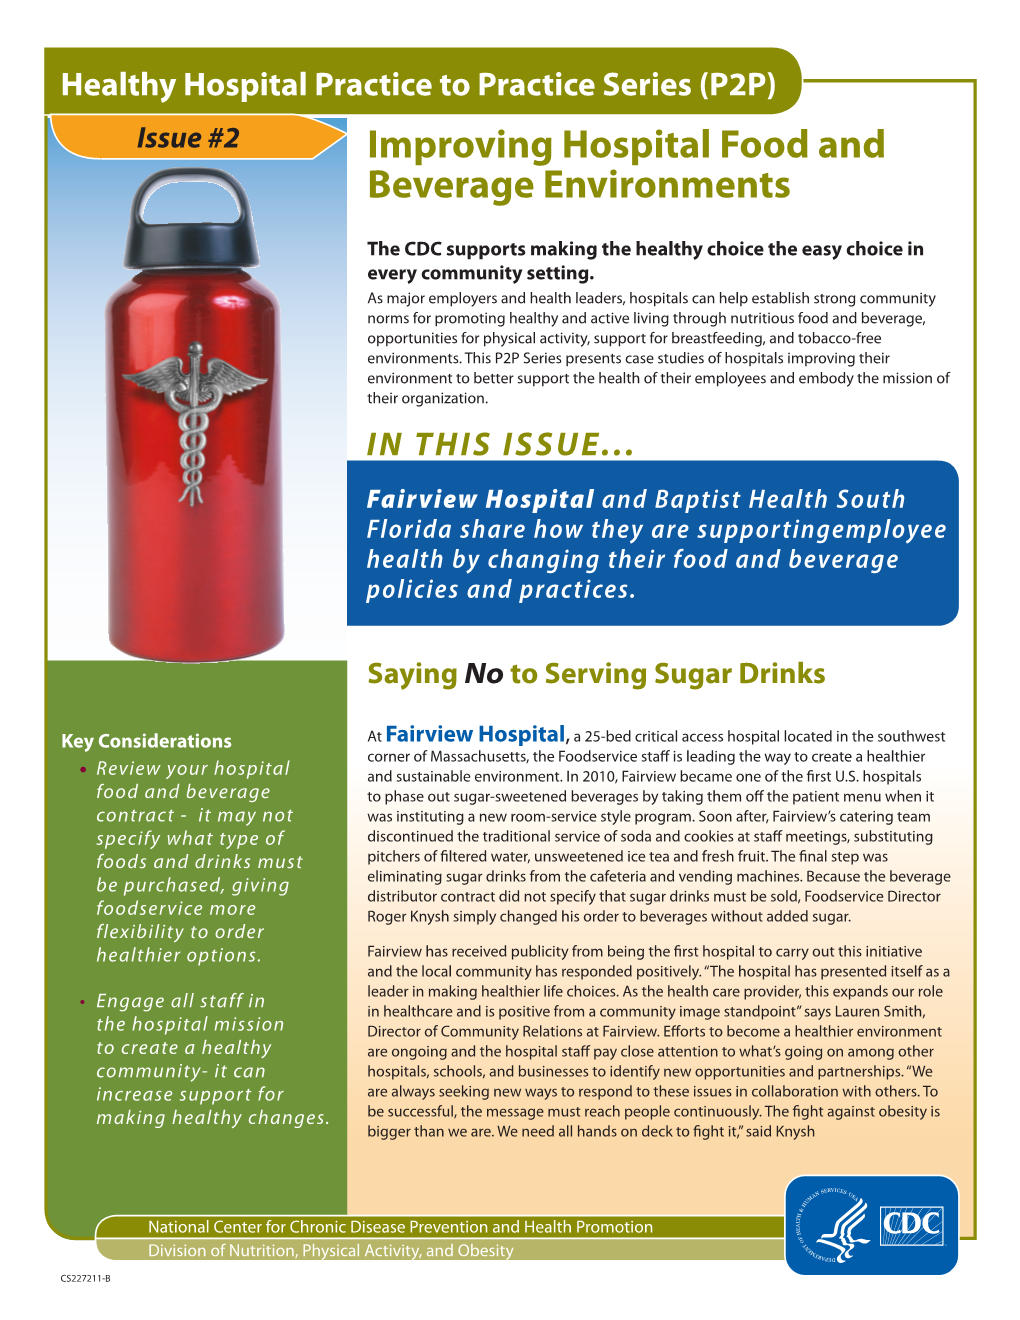 (P2P): Improving Hospital Food and Beverage Environments